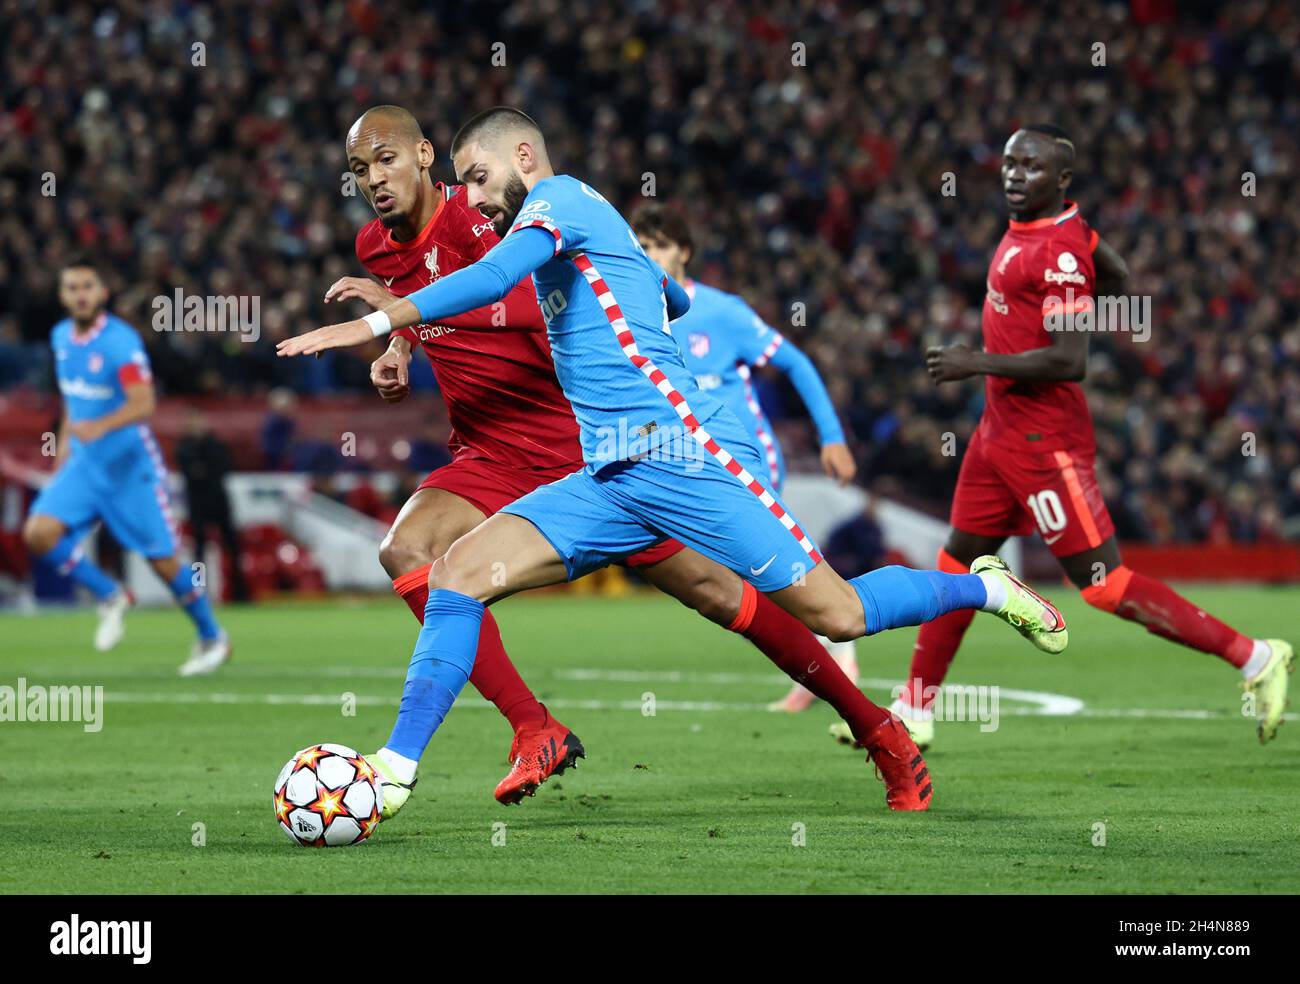 Liverpool, England, 3rd November 2021.  Fabinho of Liverpool challenges Yannick Carrasco of Atletico Madrid during the UEFA Champions League match at Anfield, Liverpool. Picture credit should read: Darren Staples / Sportimage Credit: Sportimage/Alamy Live News Stock Photo